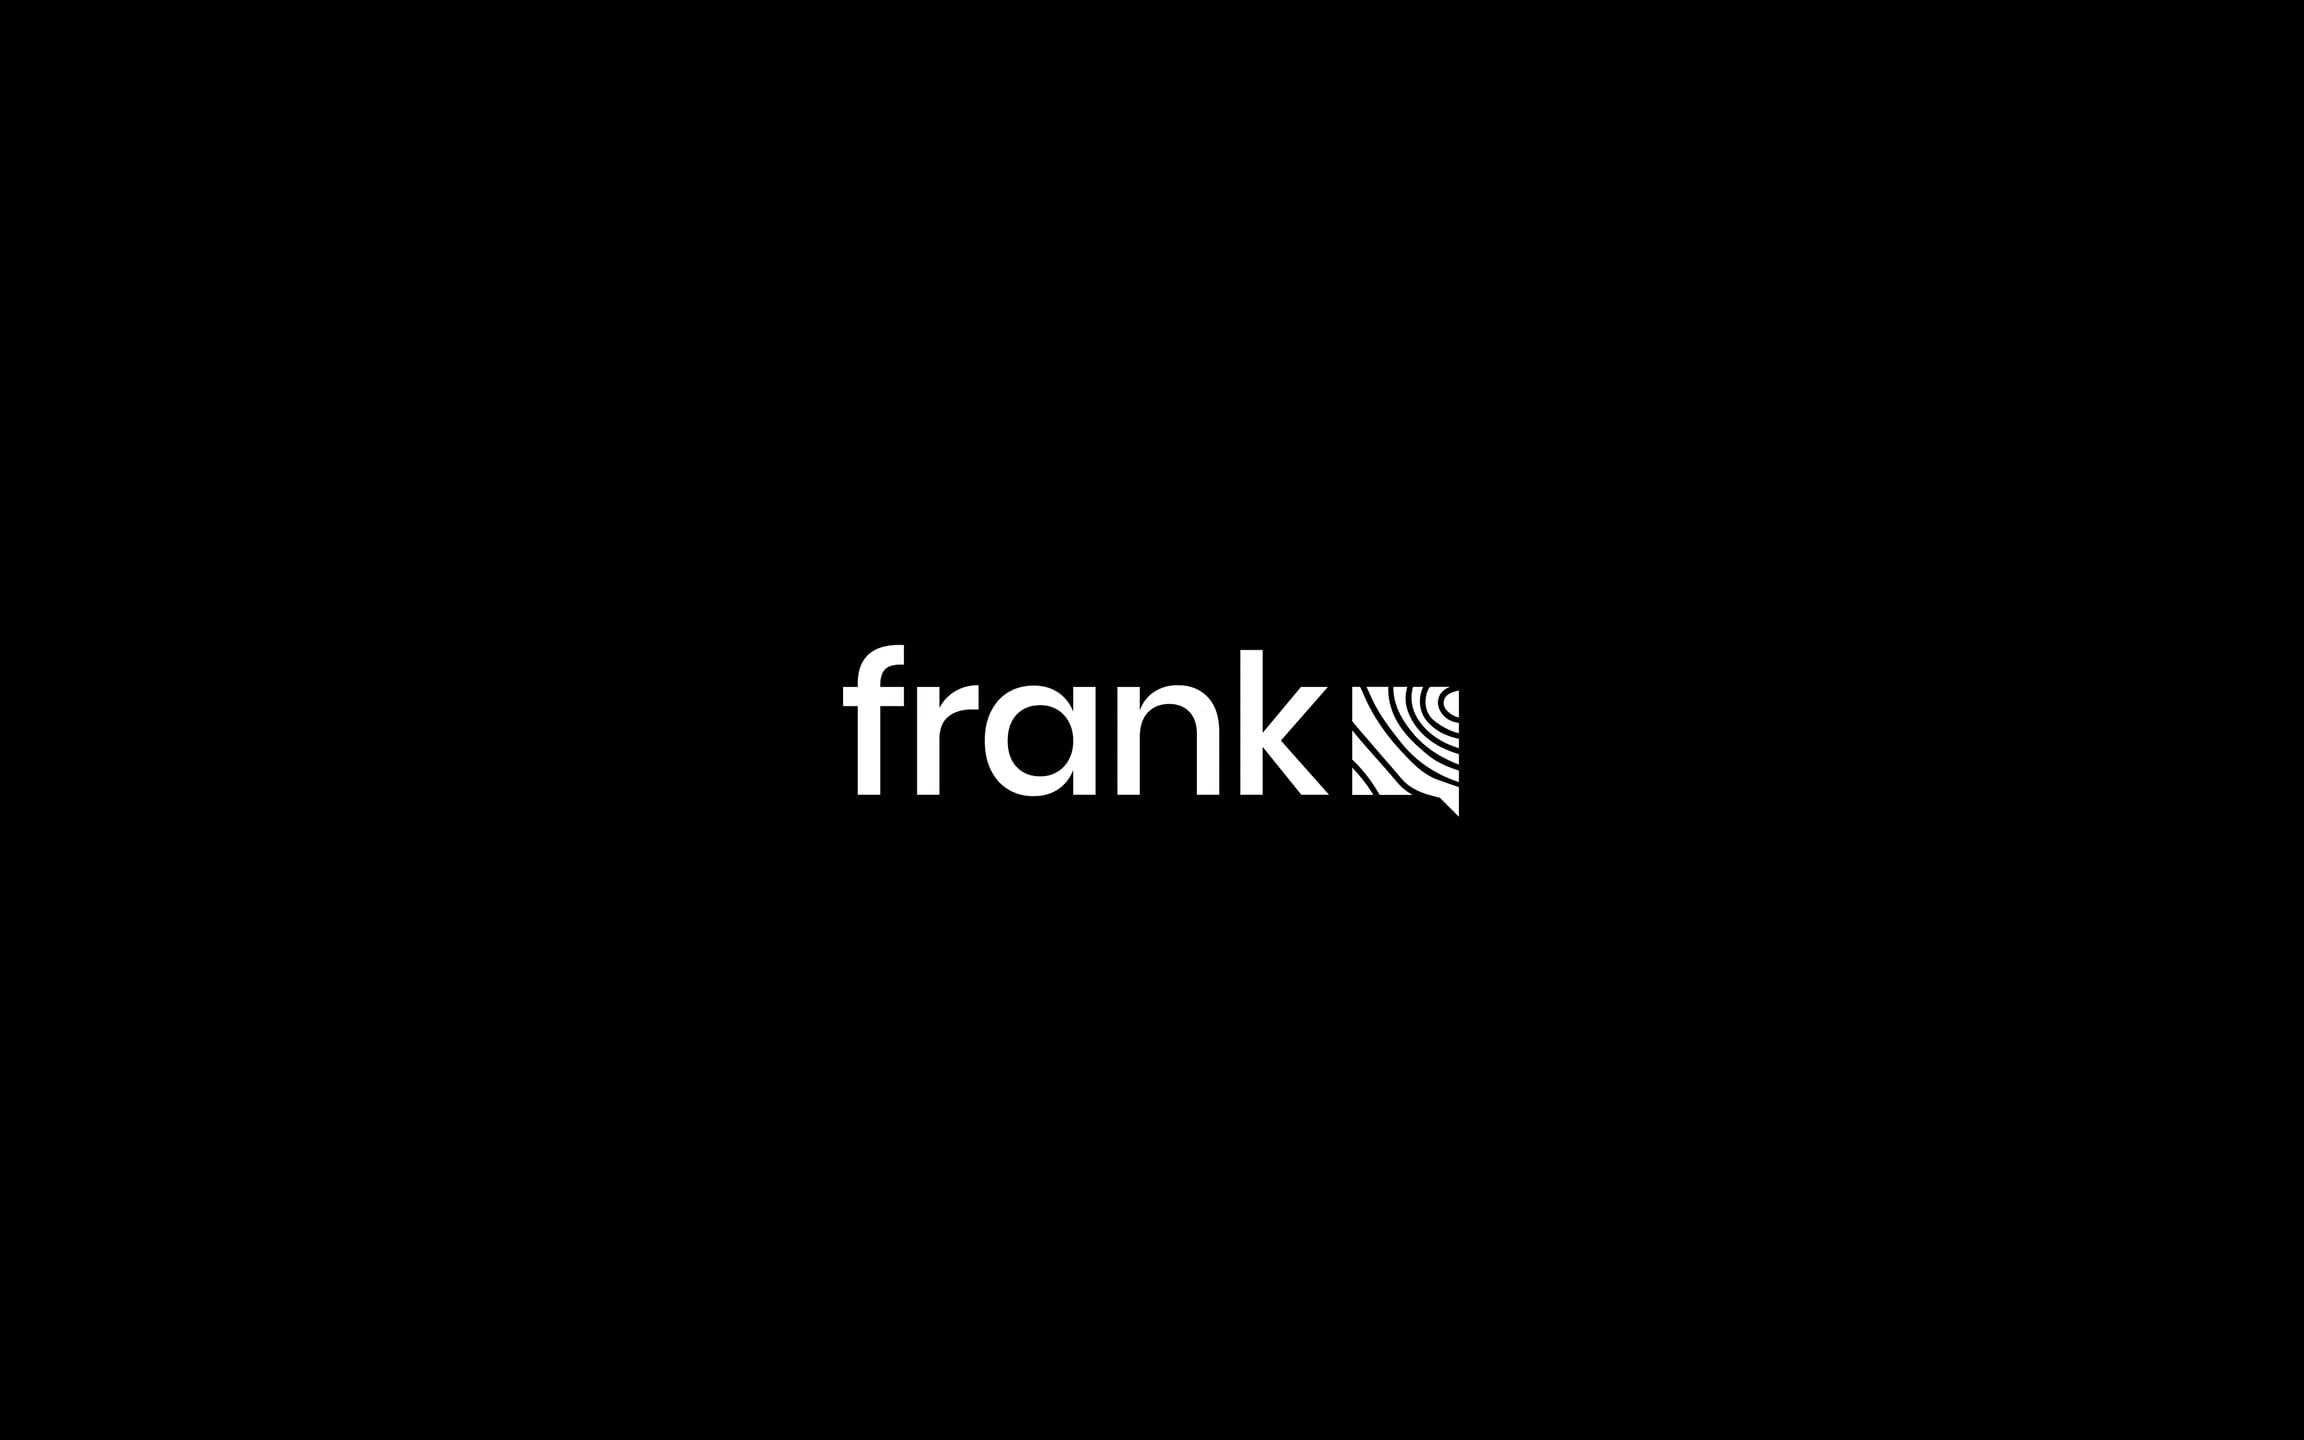 Welcome to Frank on Vimeo